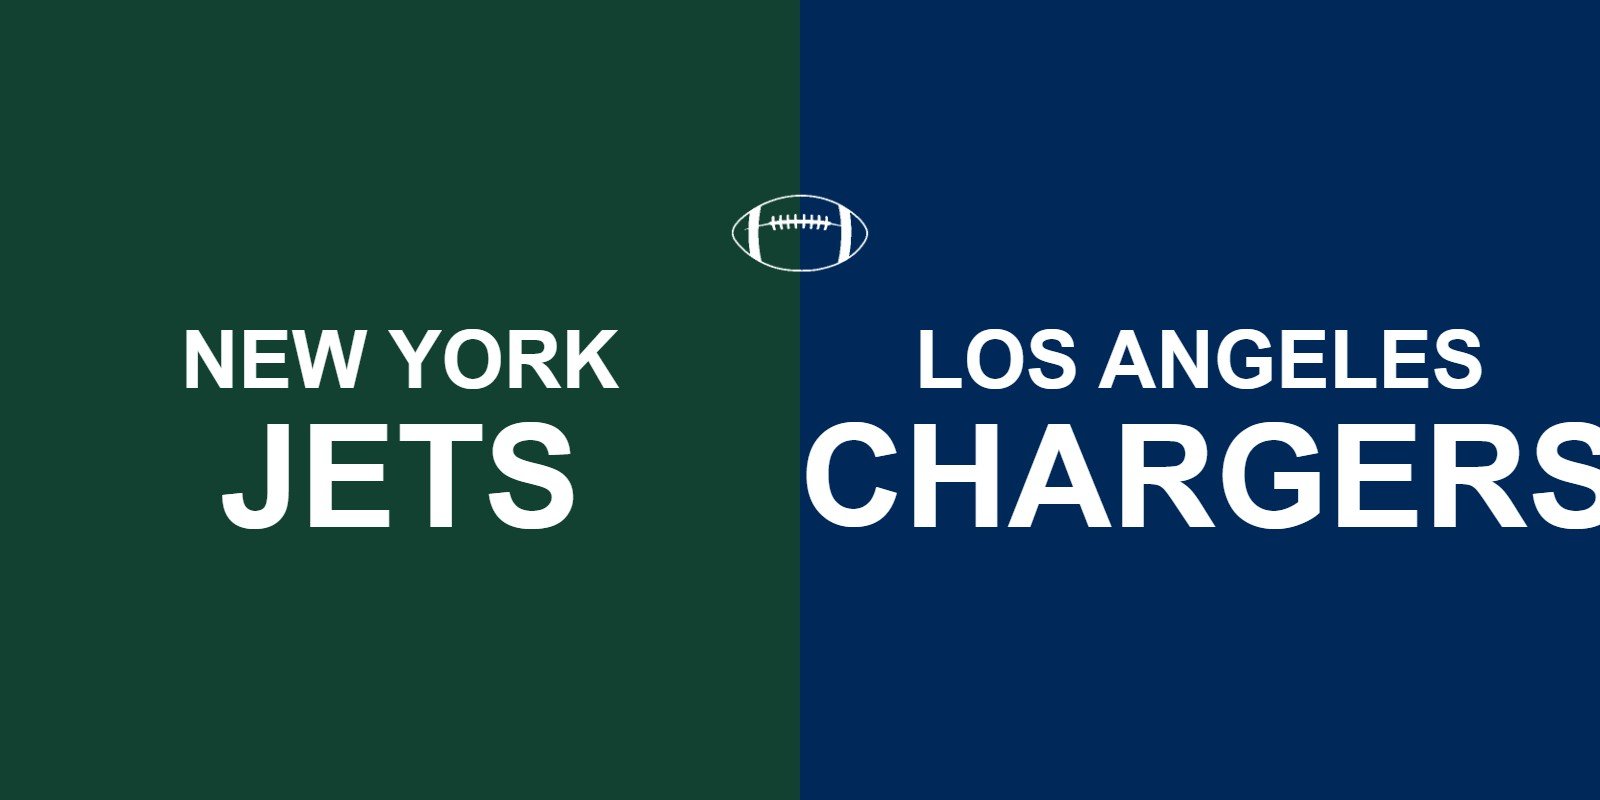 Jets vs Chargers Tickets 